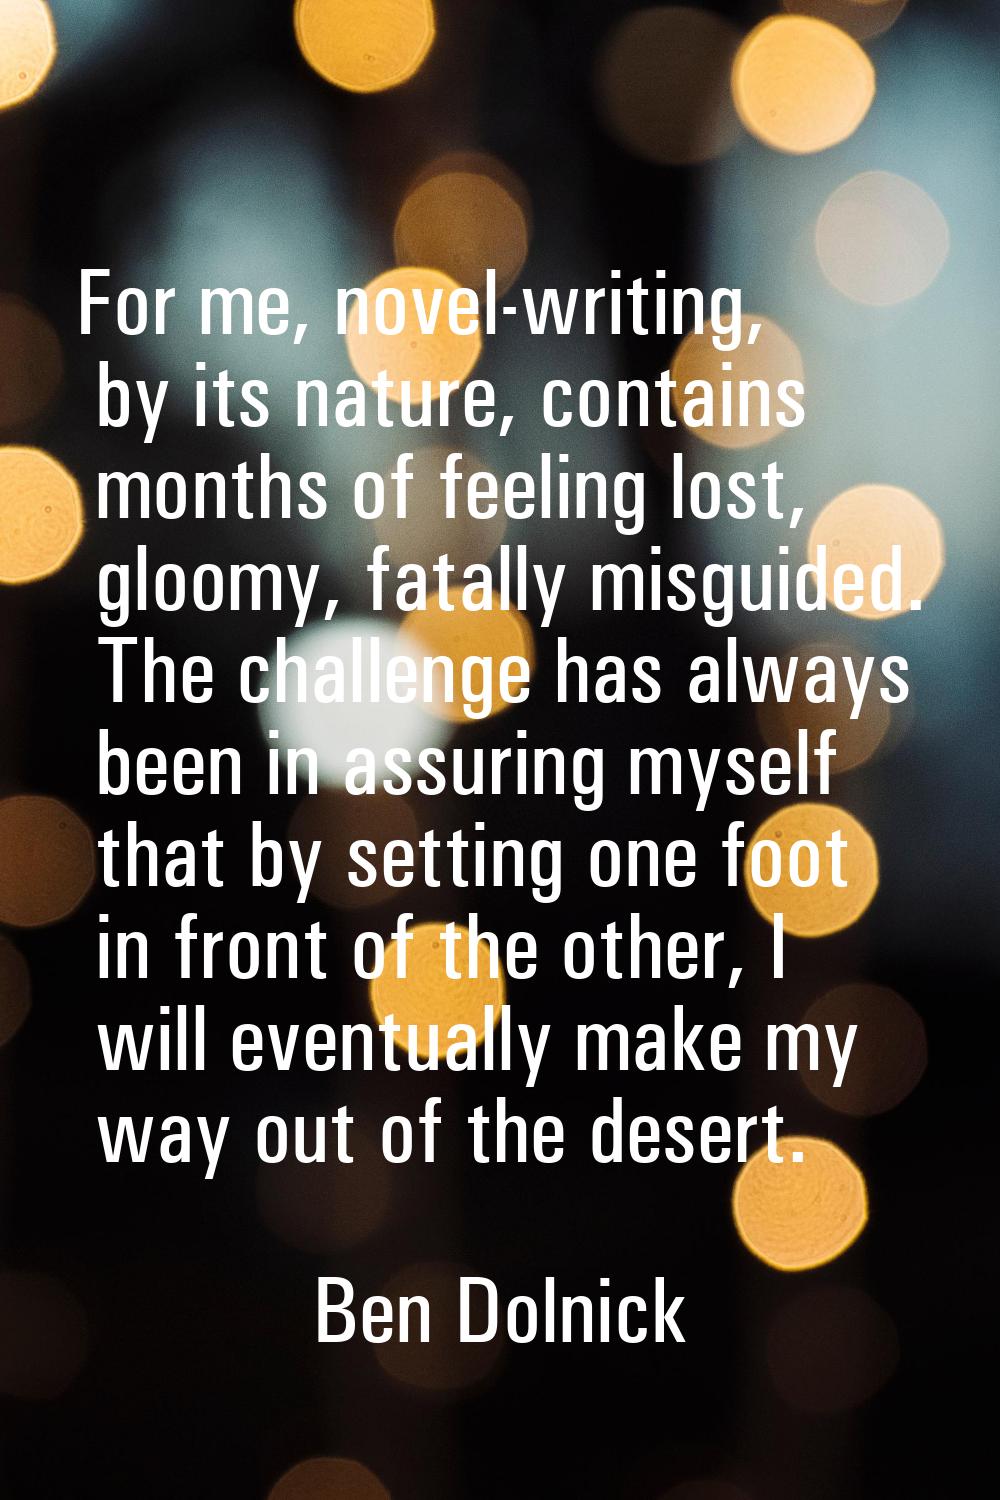 For me, novel-writing, by its nature, contains months of feeling lost, gloomy, fatally misguided. T